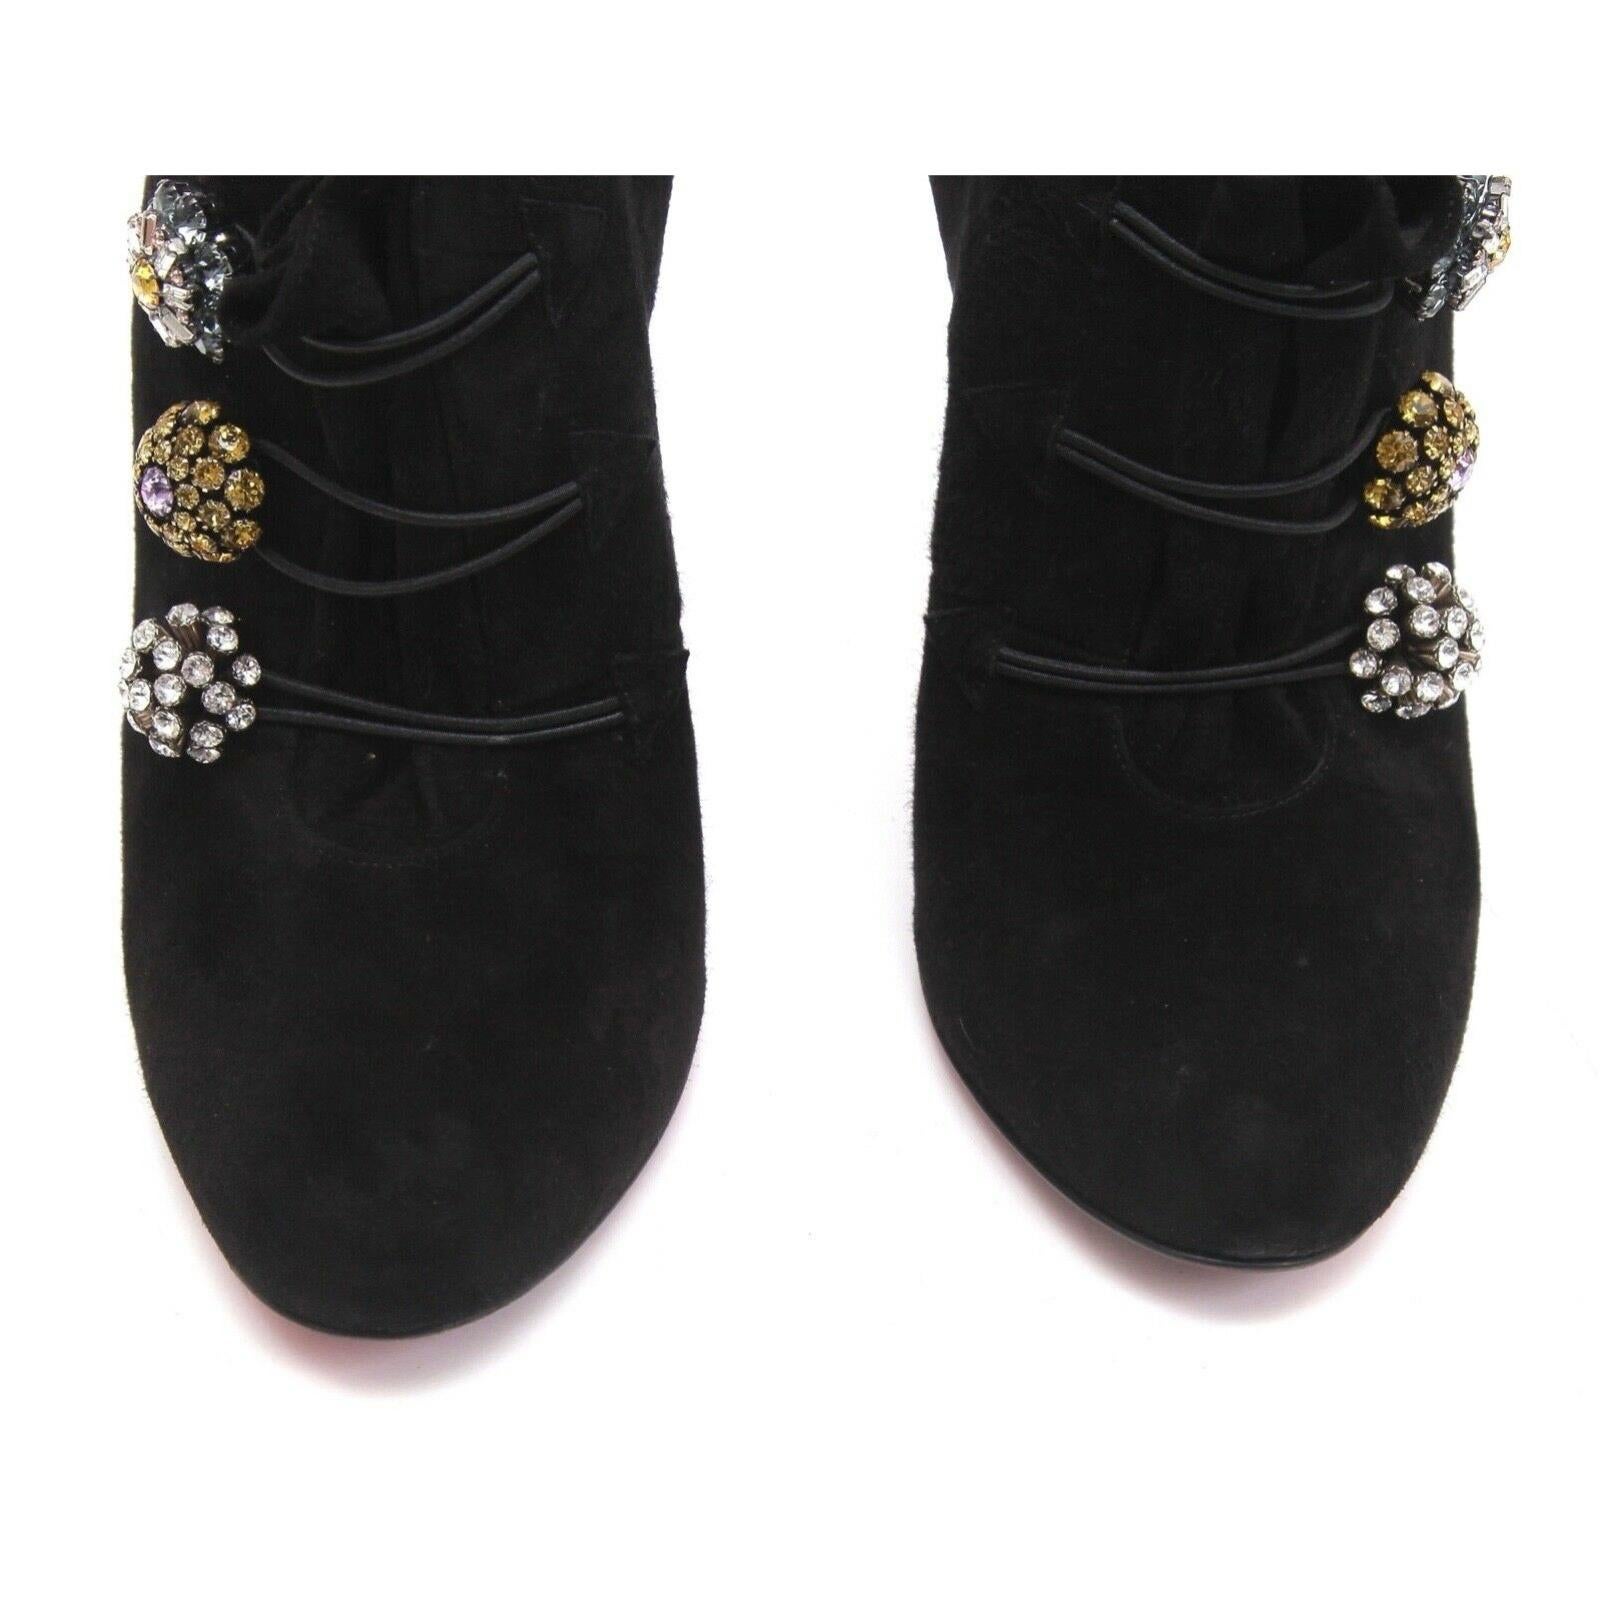 CHRISTIAN LOUBOUTIN Black Suede Ankle Boot BOOTONI MJ Leather Crystals Sz 38 In Good Condition For Sale In Hollywood, FL